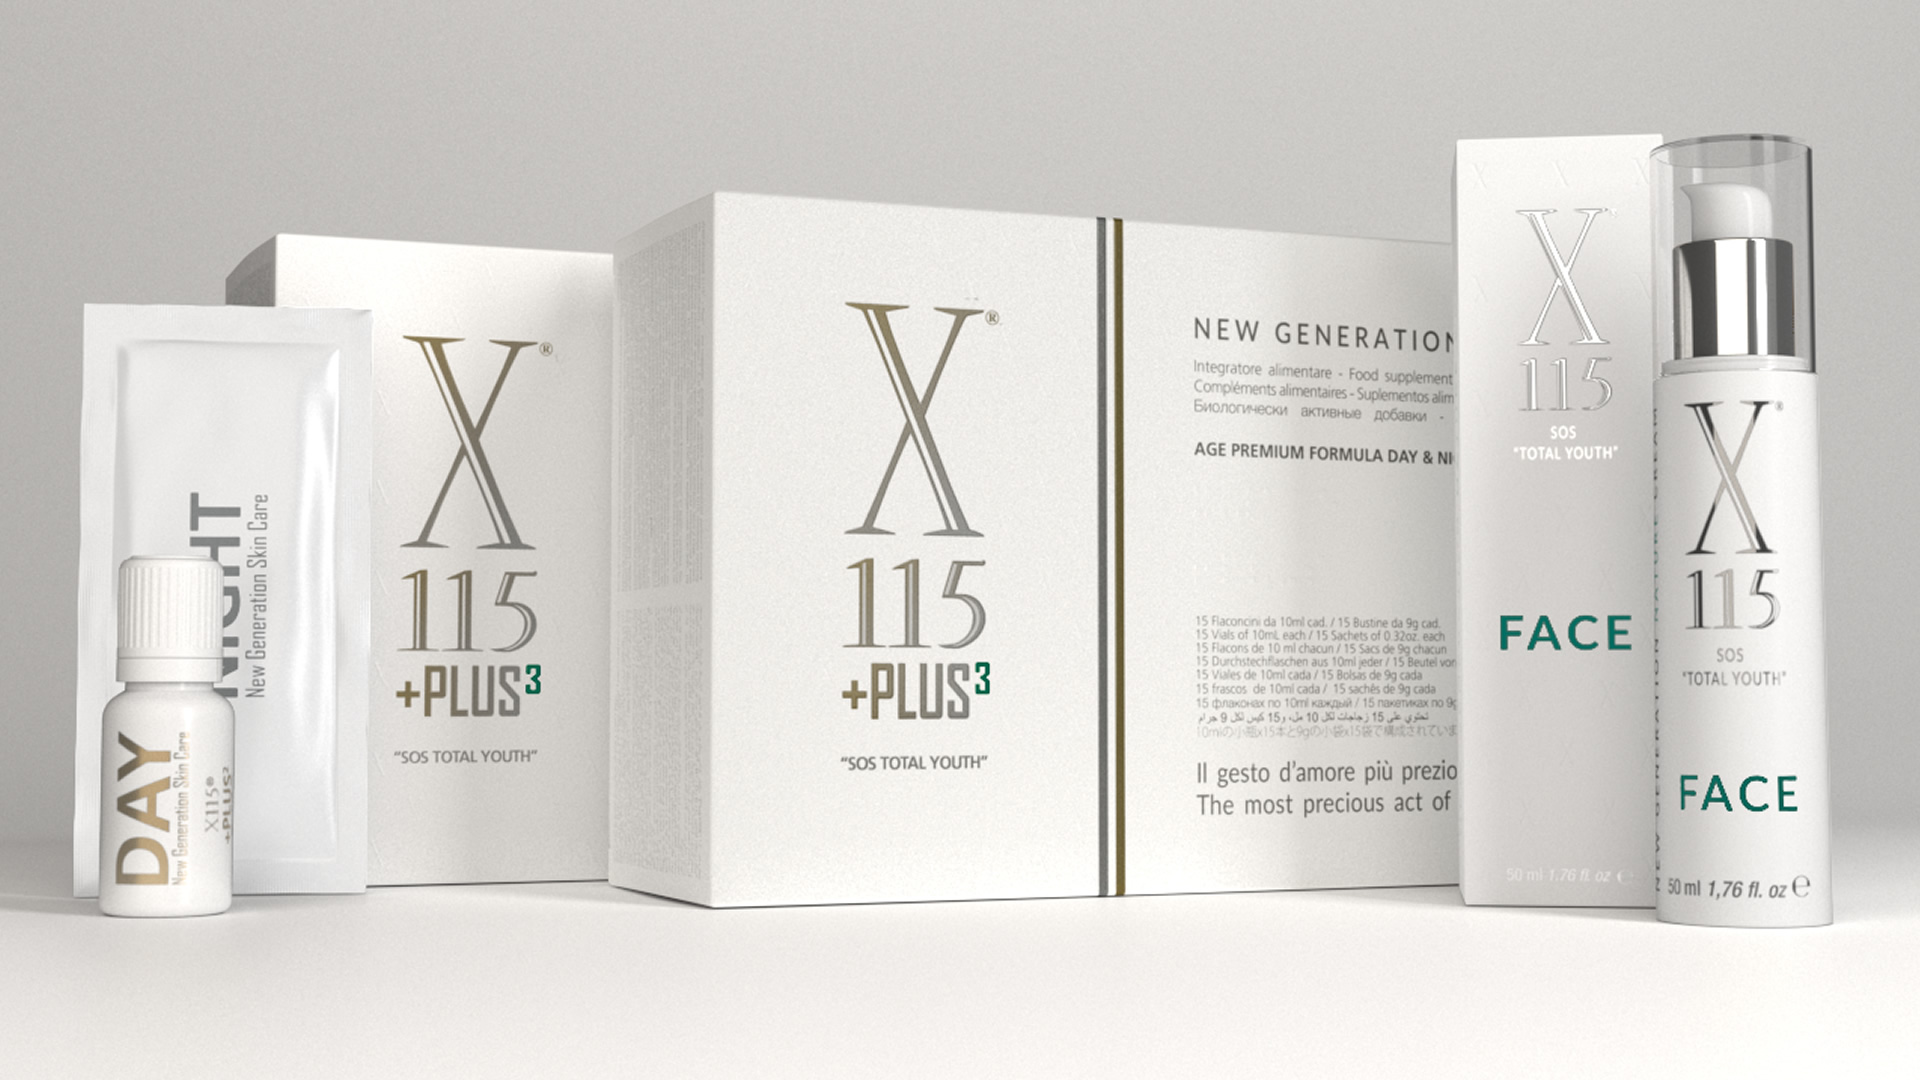 X115 PLUS Collagen Supplement and Anti-Wrinkle Face Cream